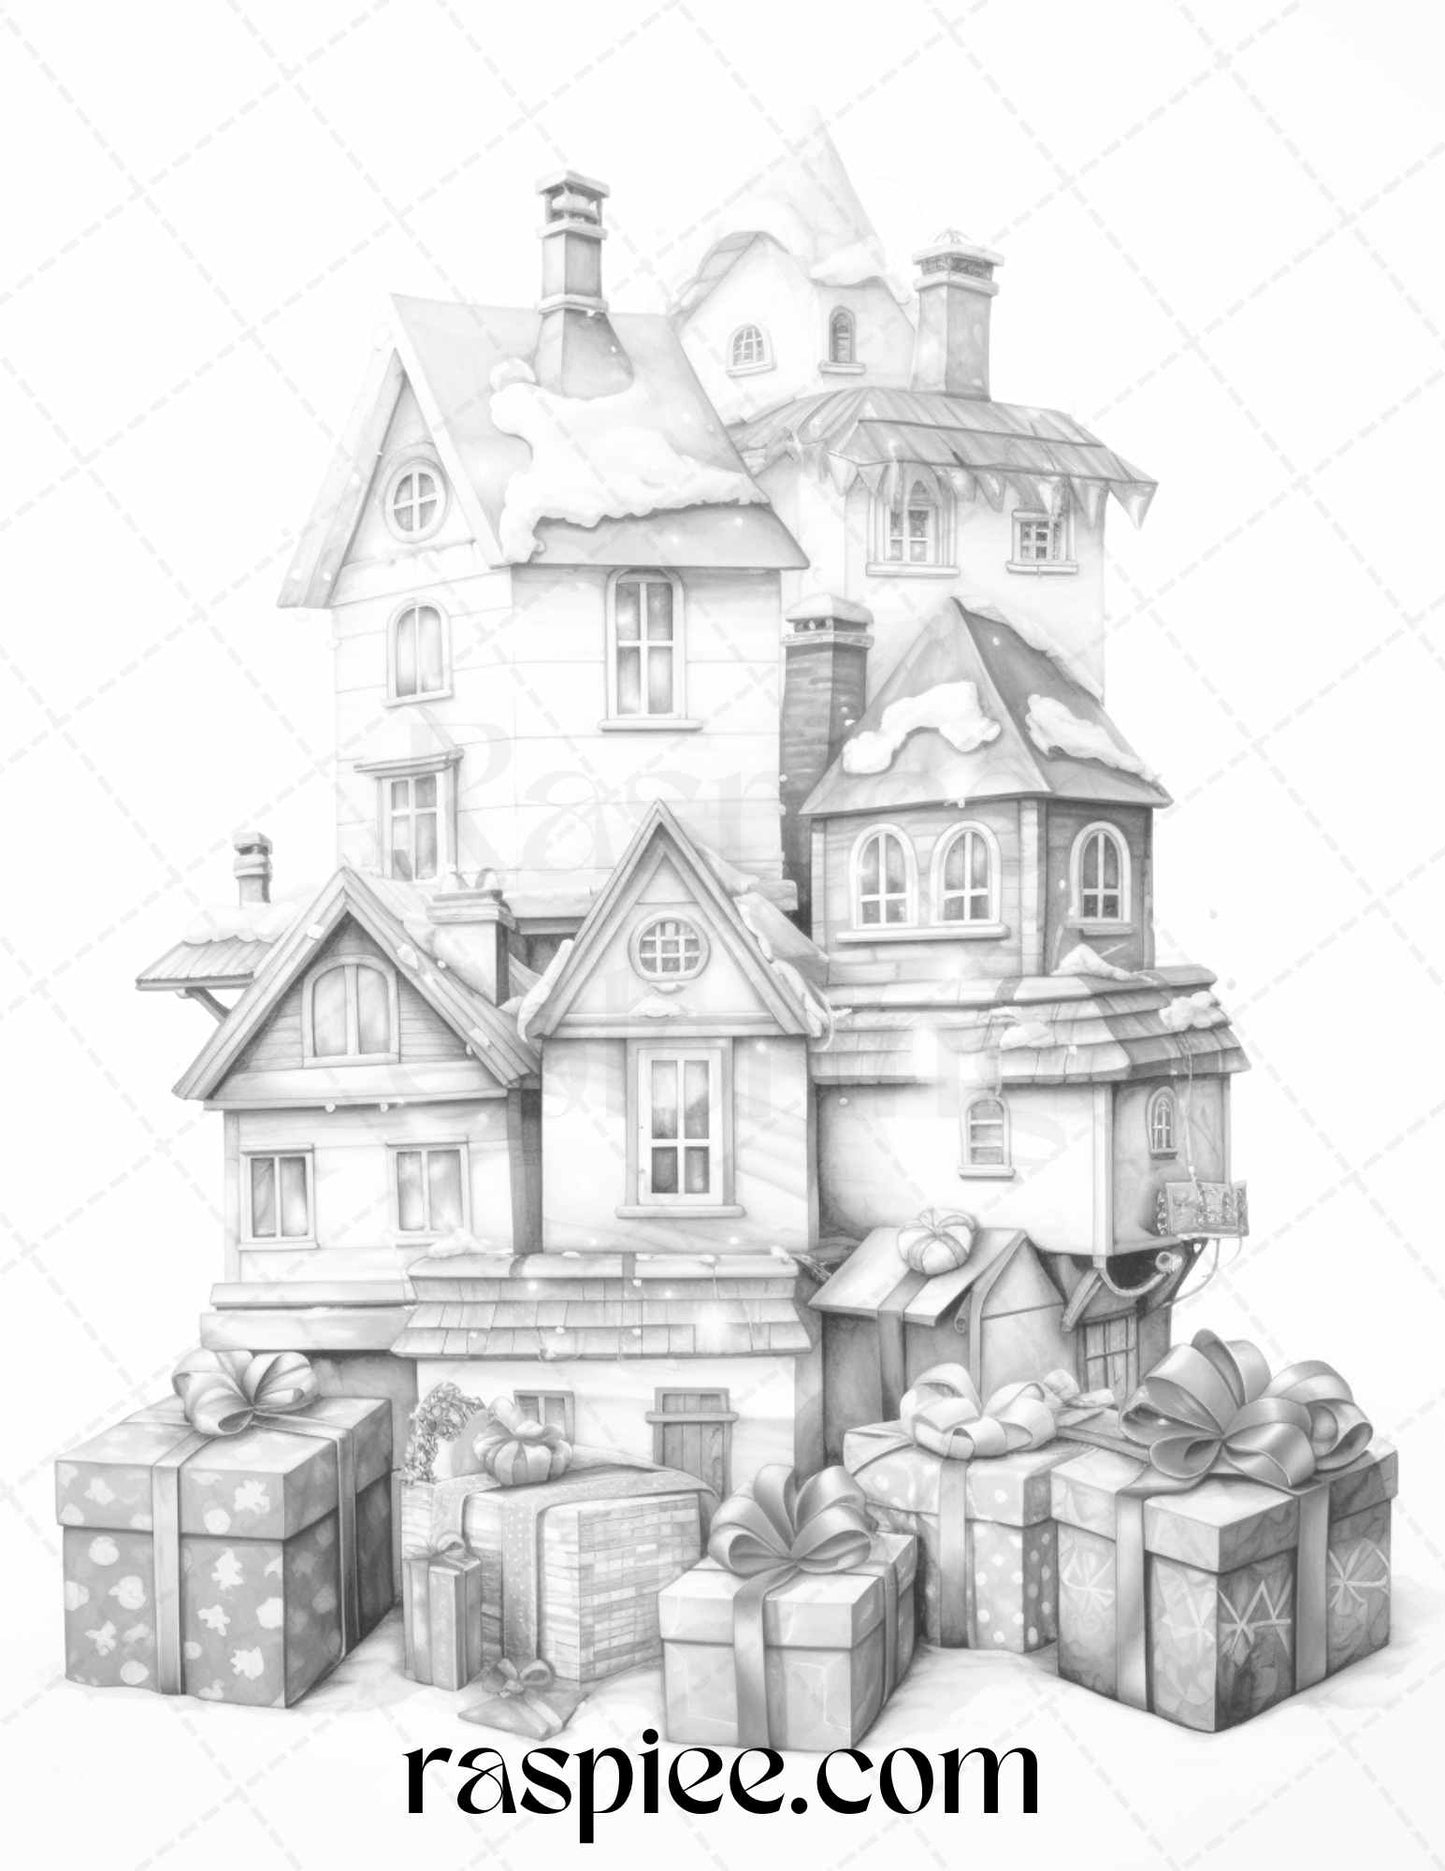 Grayscale Coloring Pages for Adults and Kids, Printable Gift Box Houses Coloring Sheets, Cute Coloring Pages for Adults and Children, DIY Gift Box Coloring for All Ages, Fun and Relaxing Coloring Activities, Creative Art Therapy for Kids and Adults